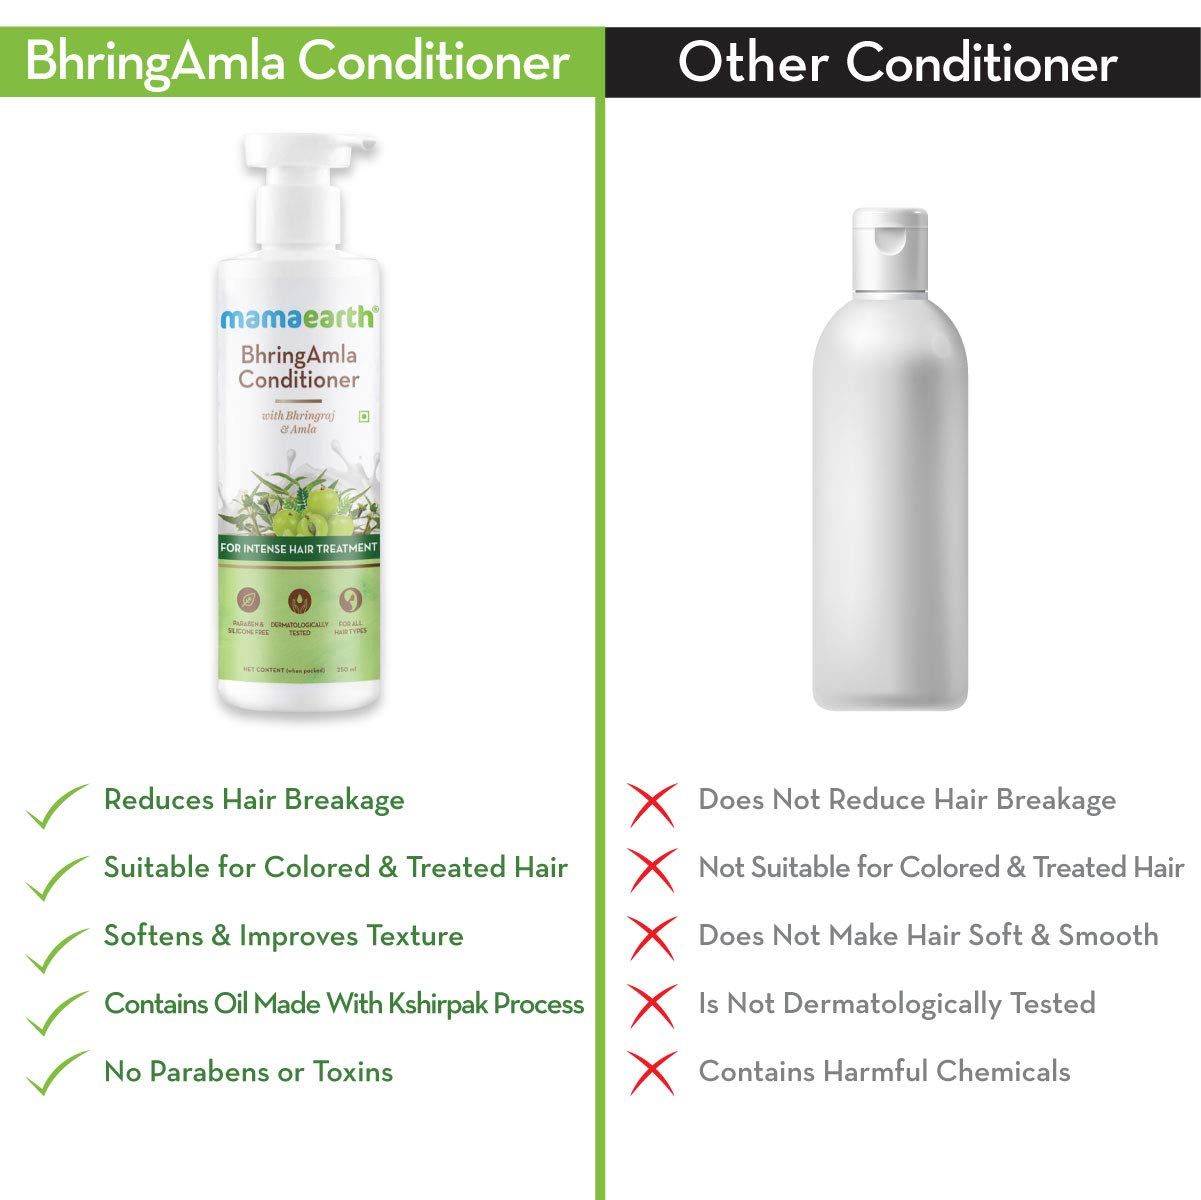 BhringAmla Conditioner with Bhringraj and Amla for Intense Hair Treatment - 250ml